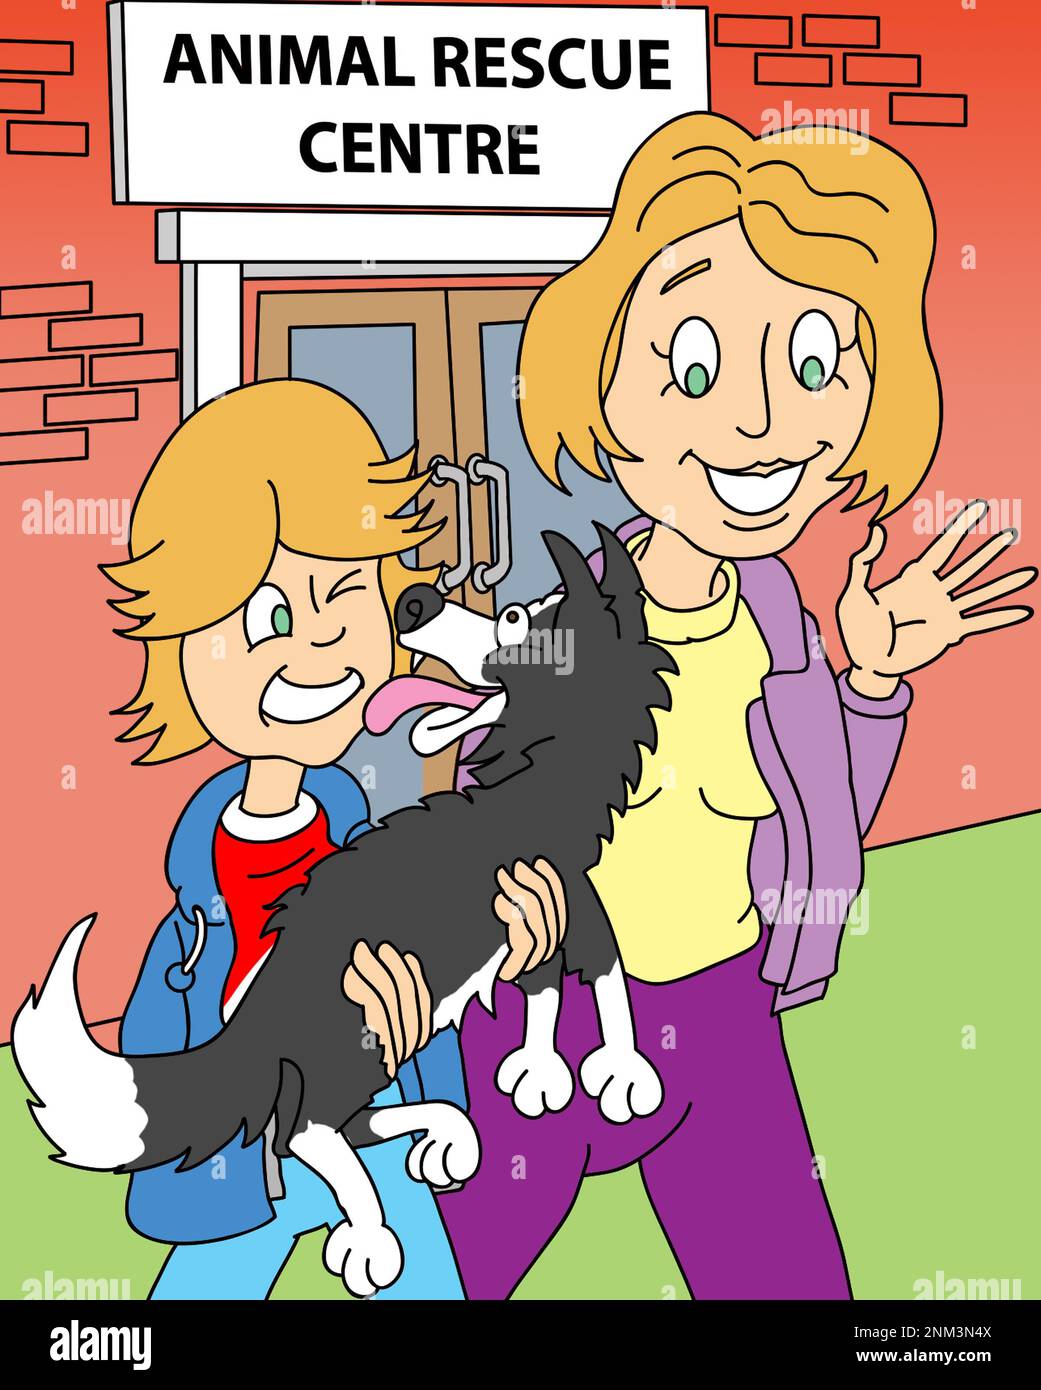 Art illustration of a happy boy holding a dog, standing with his mother, outside of an Animal Rescue Centre after adopting the dog. Adopt don't buy. Stock Photo